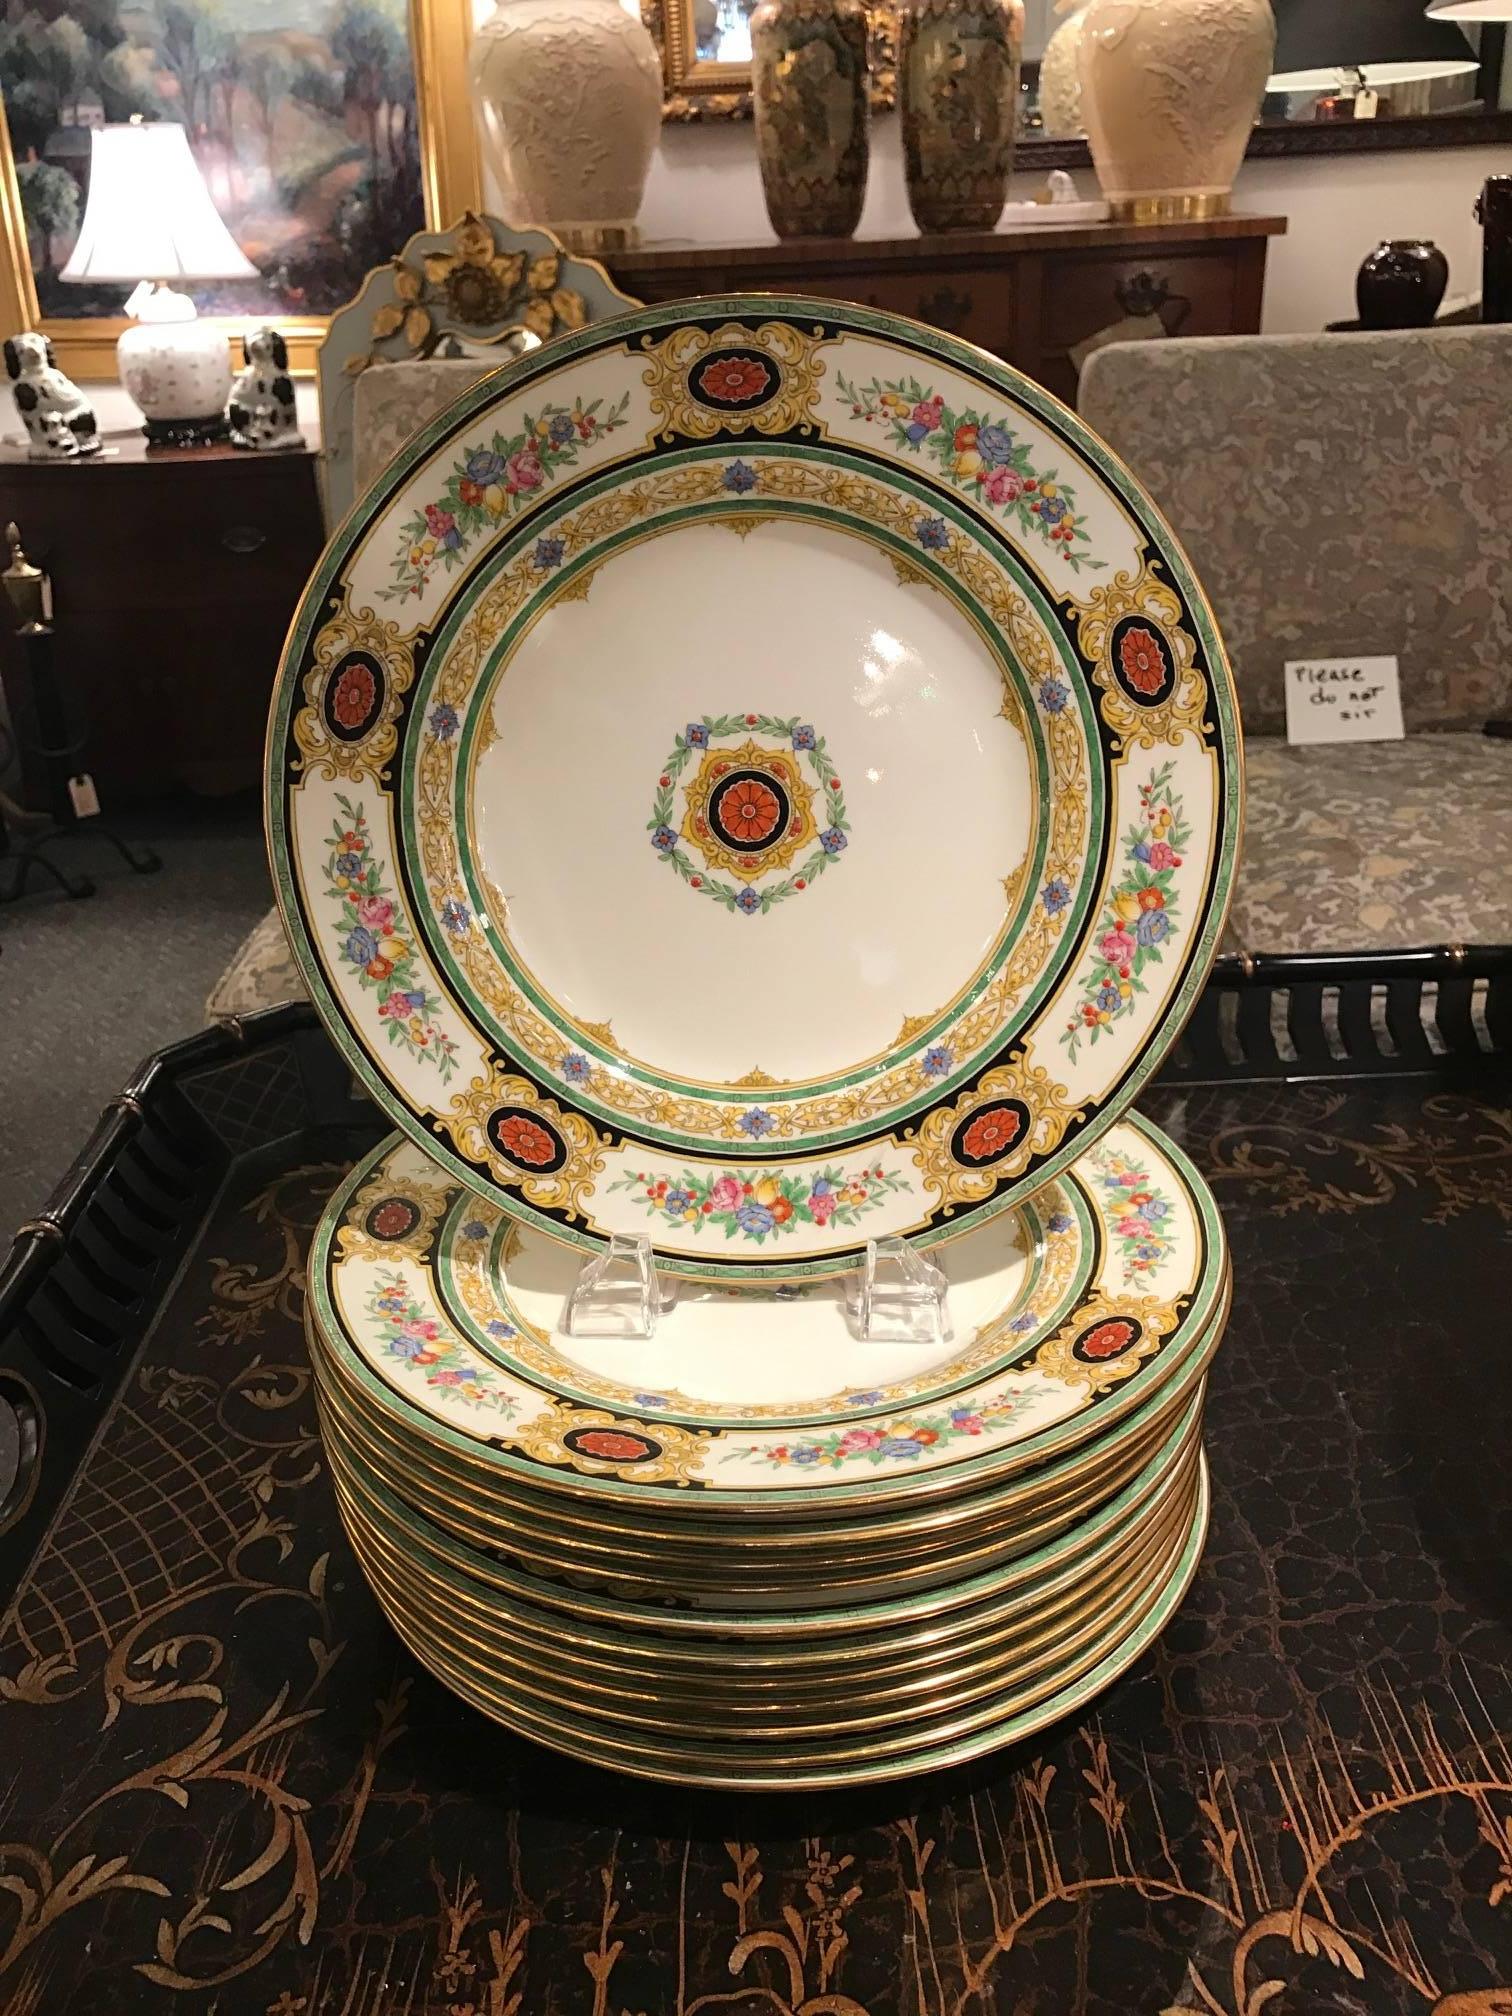 Elegant set of 12 hand-painted English dinner service plates. The hand enameled borders and centers with floral panels and lacy borders accented with ebony banding. Hand applied gilt edges.